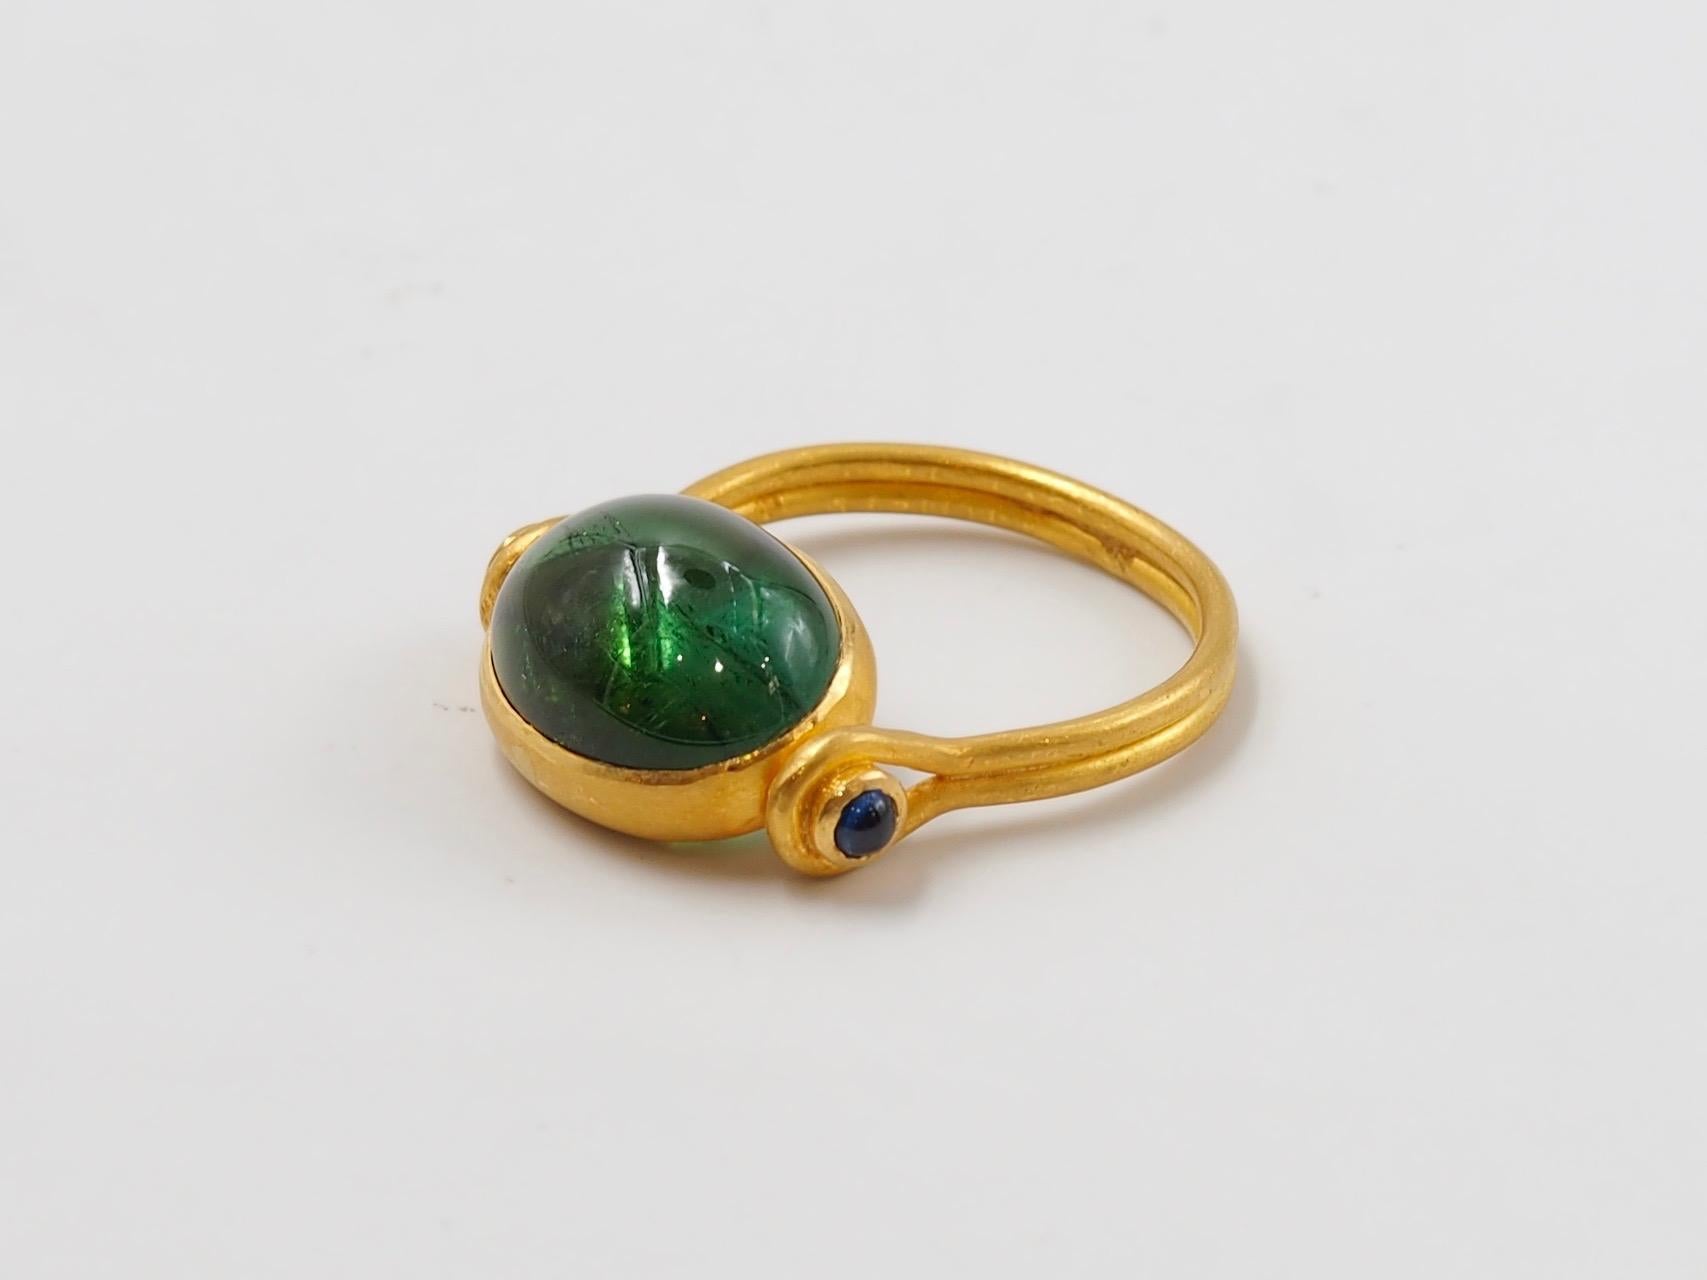 Oval Cut Scrives 7.35 Carat Green Tourmaline and Sapphire Cabochons 22 Karat Gold Ring